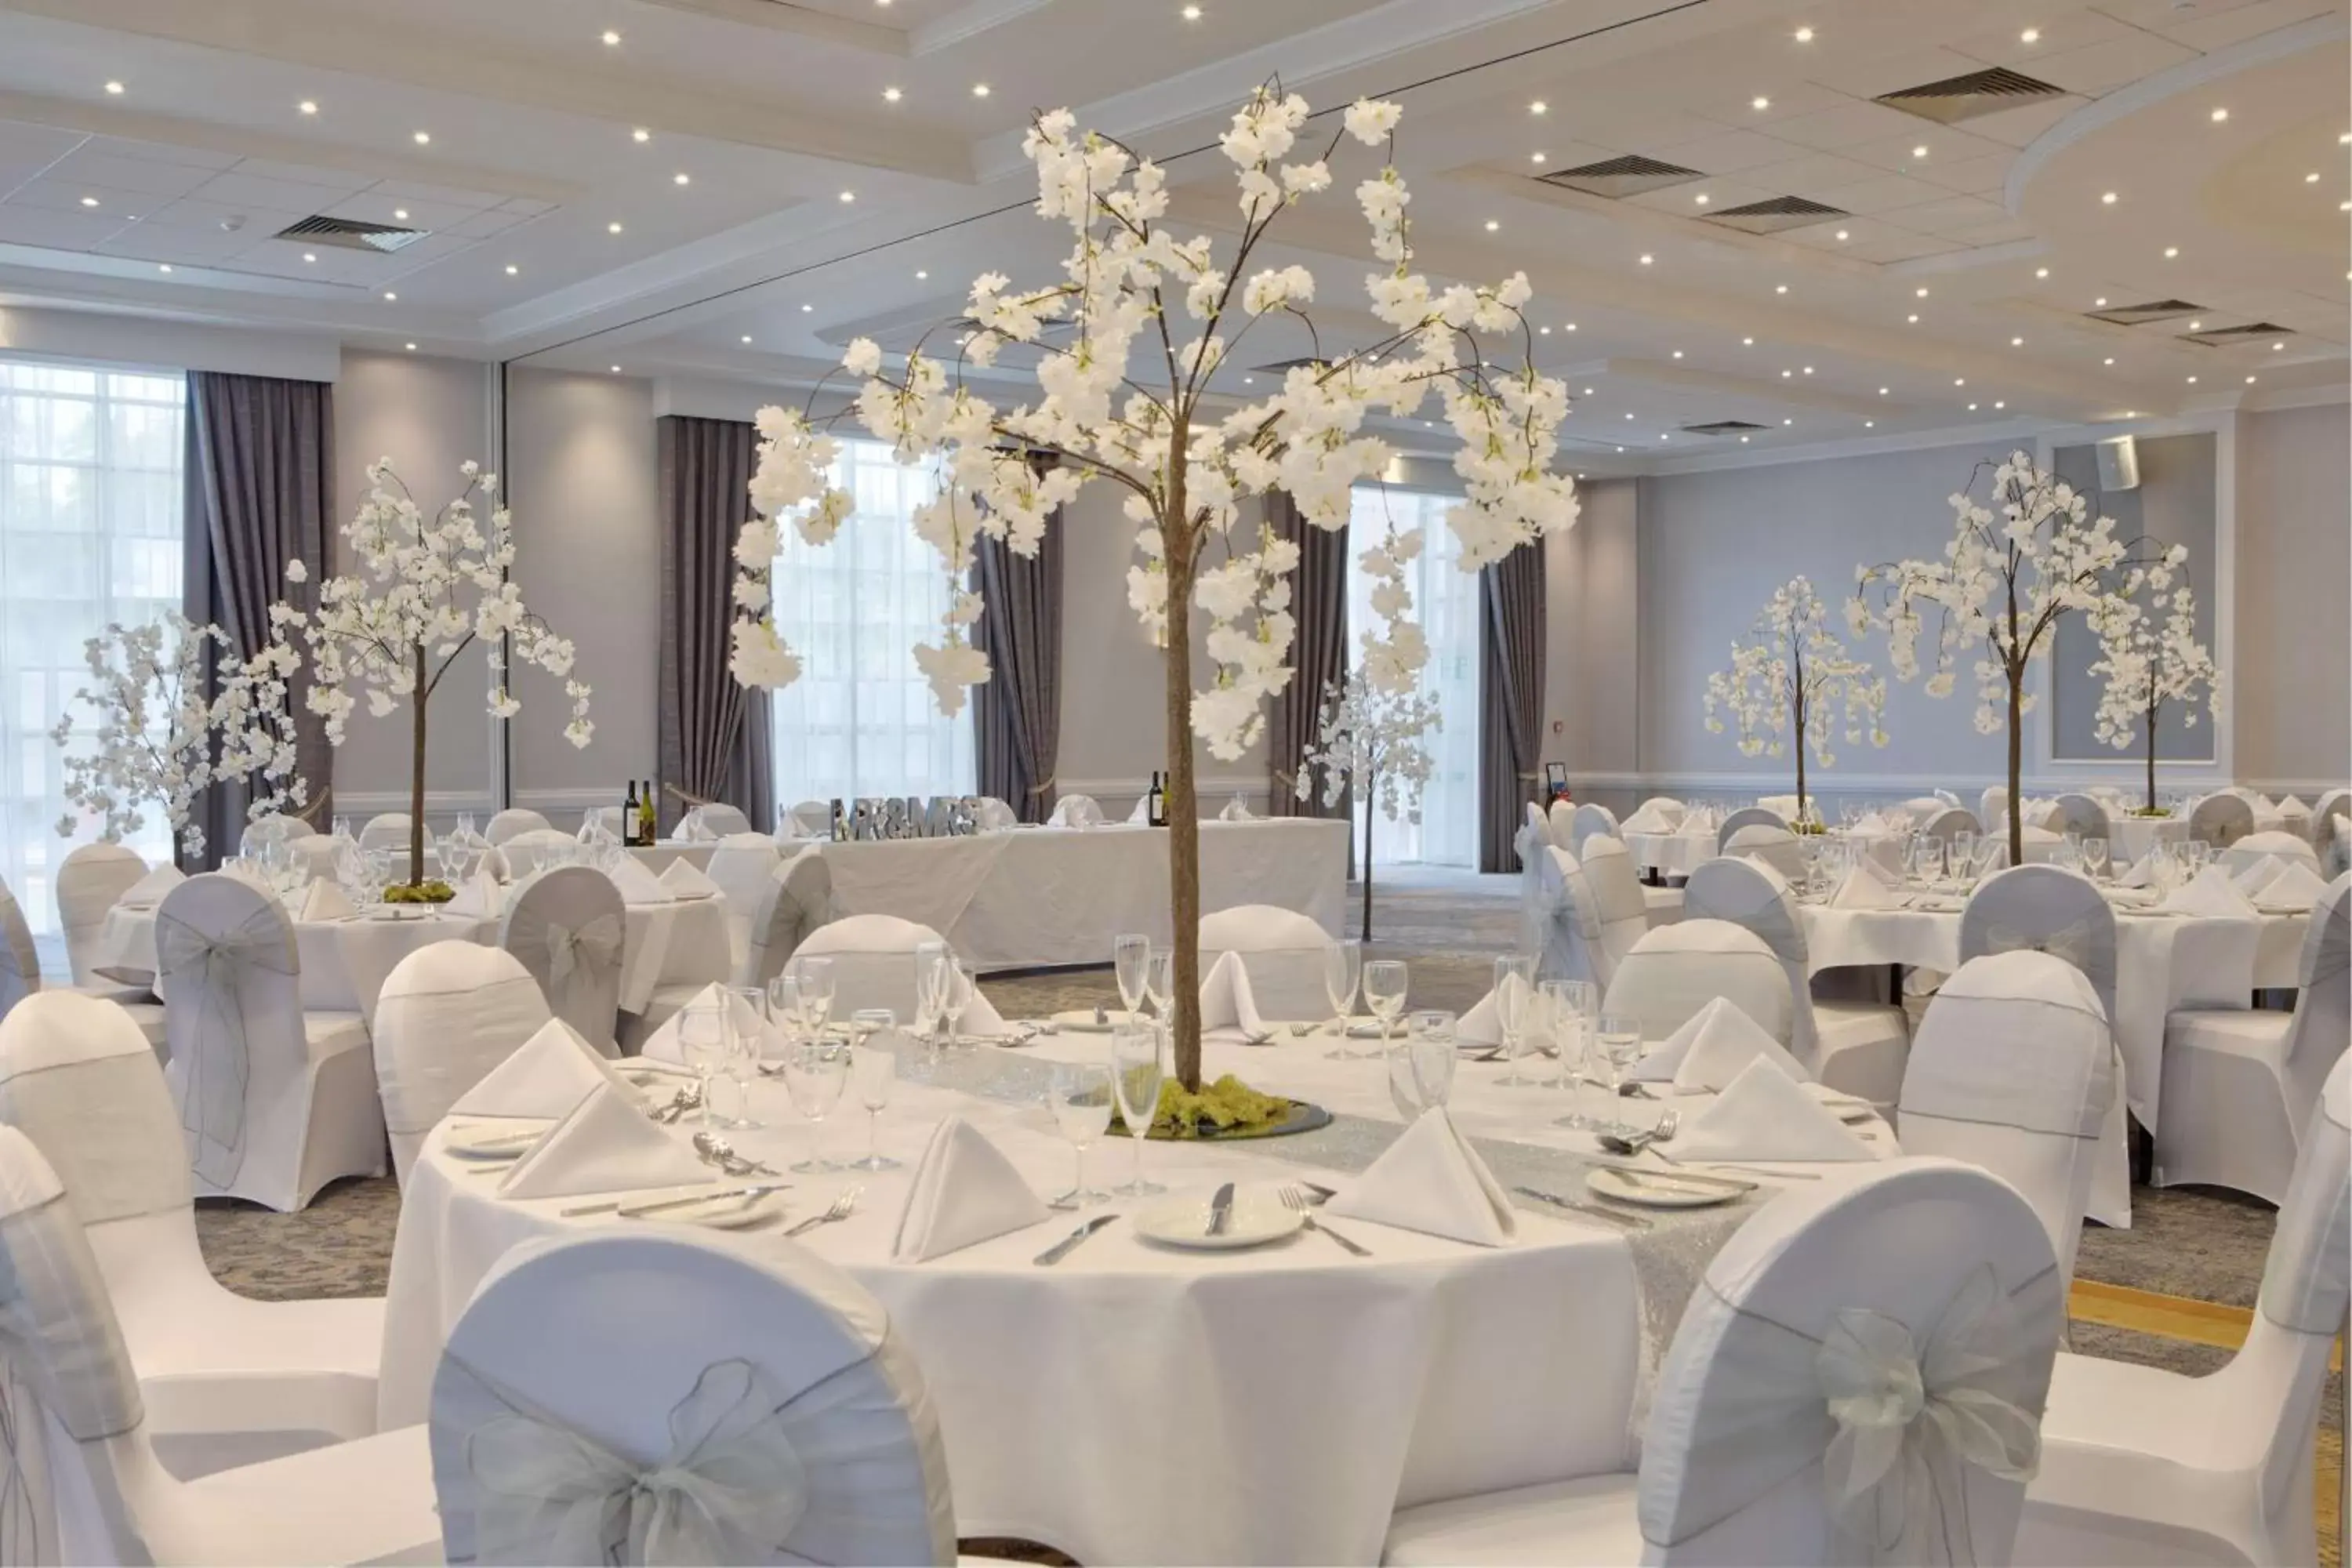 Meeting/conference room, Banquet Facilities in DoubleTree by Hilton Stoke-on-Trent, United Kingdom